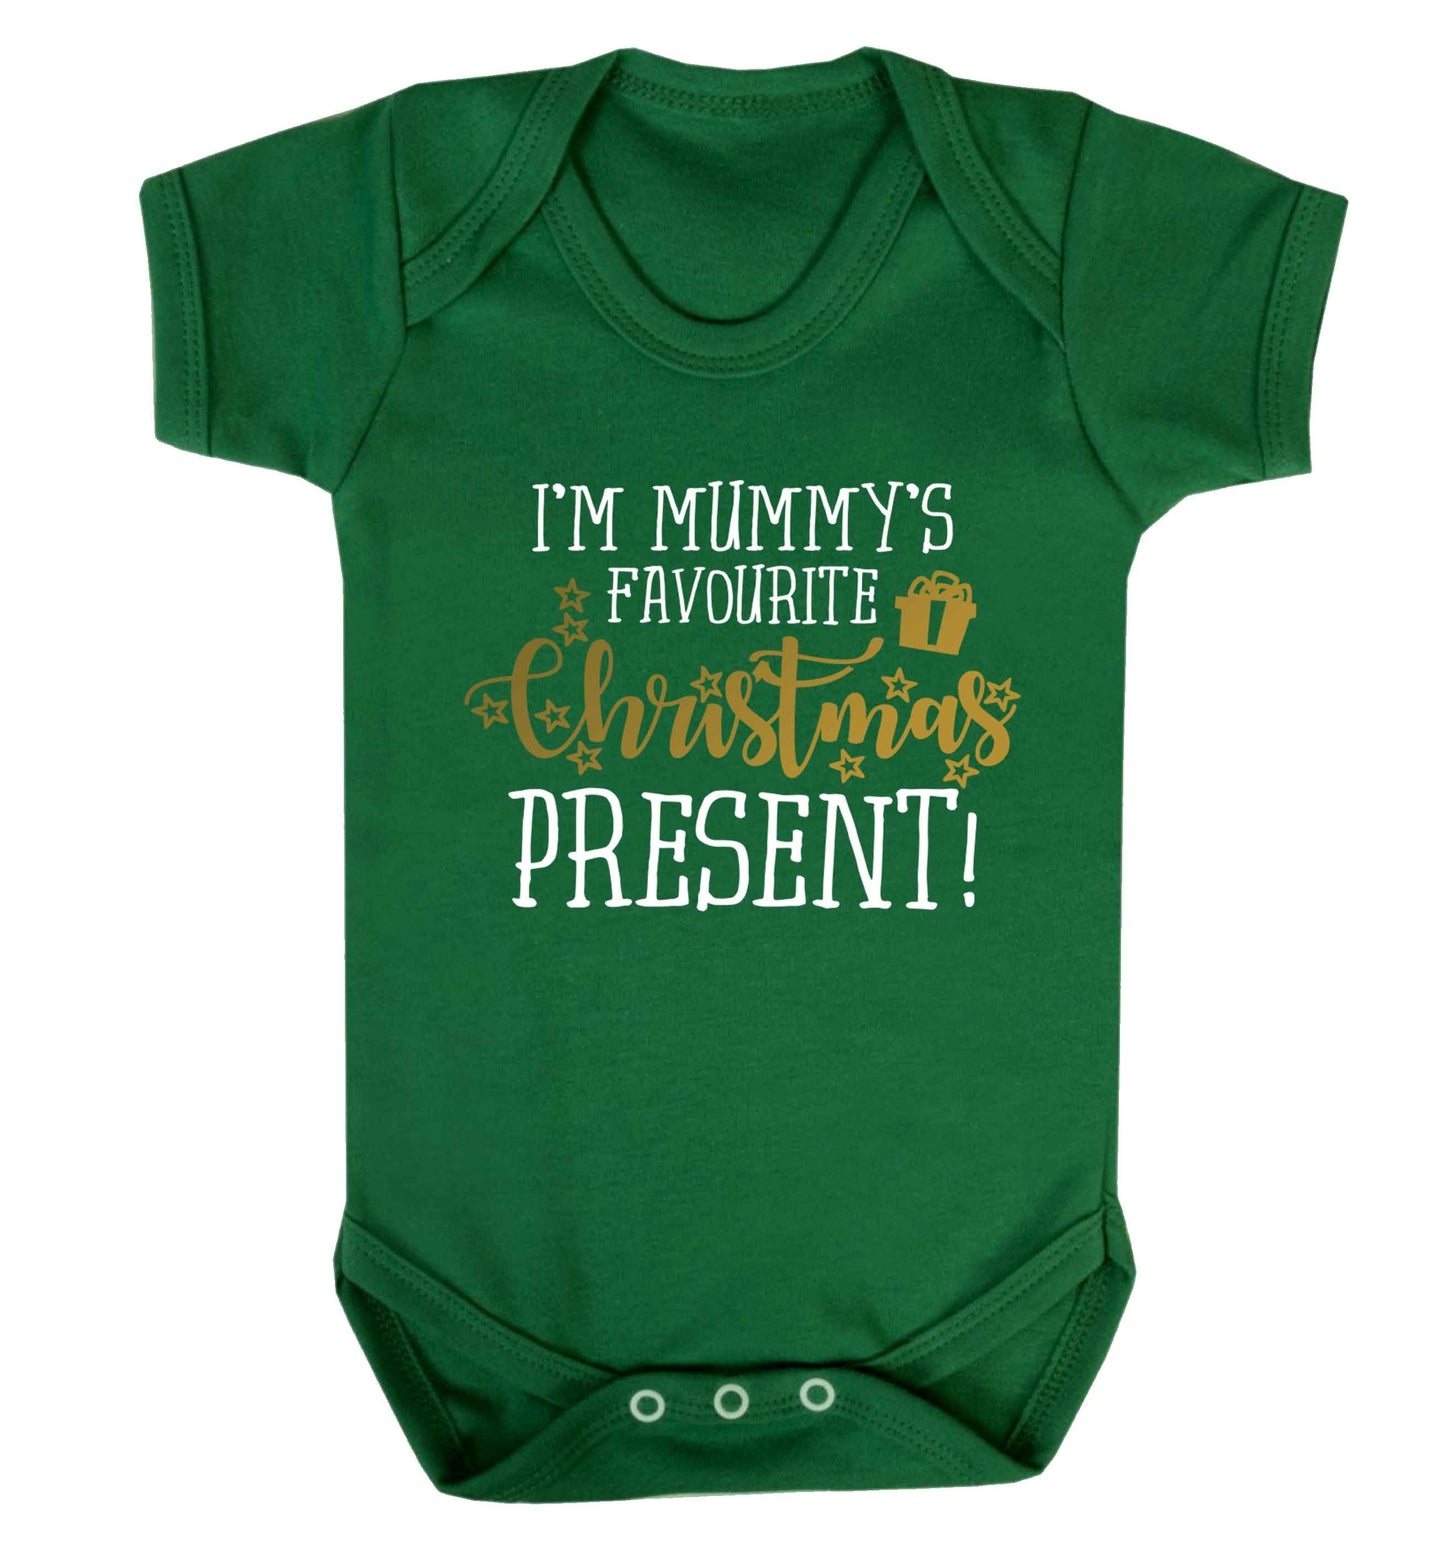 I'm Mummy's favourite Christmas present Baby Vest green 18-24 months